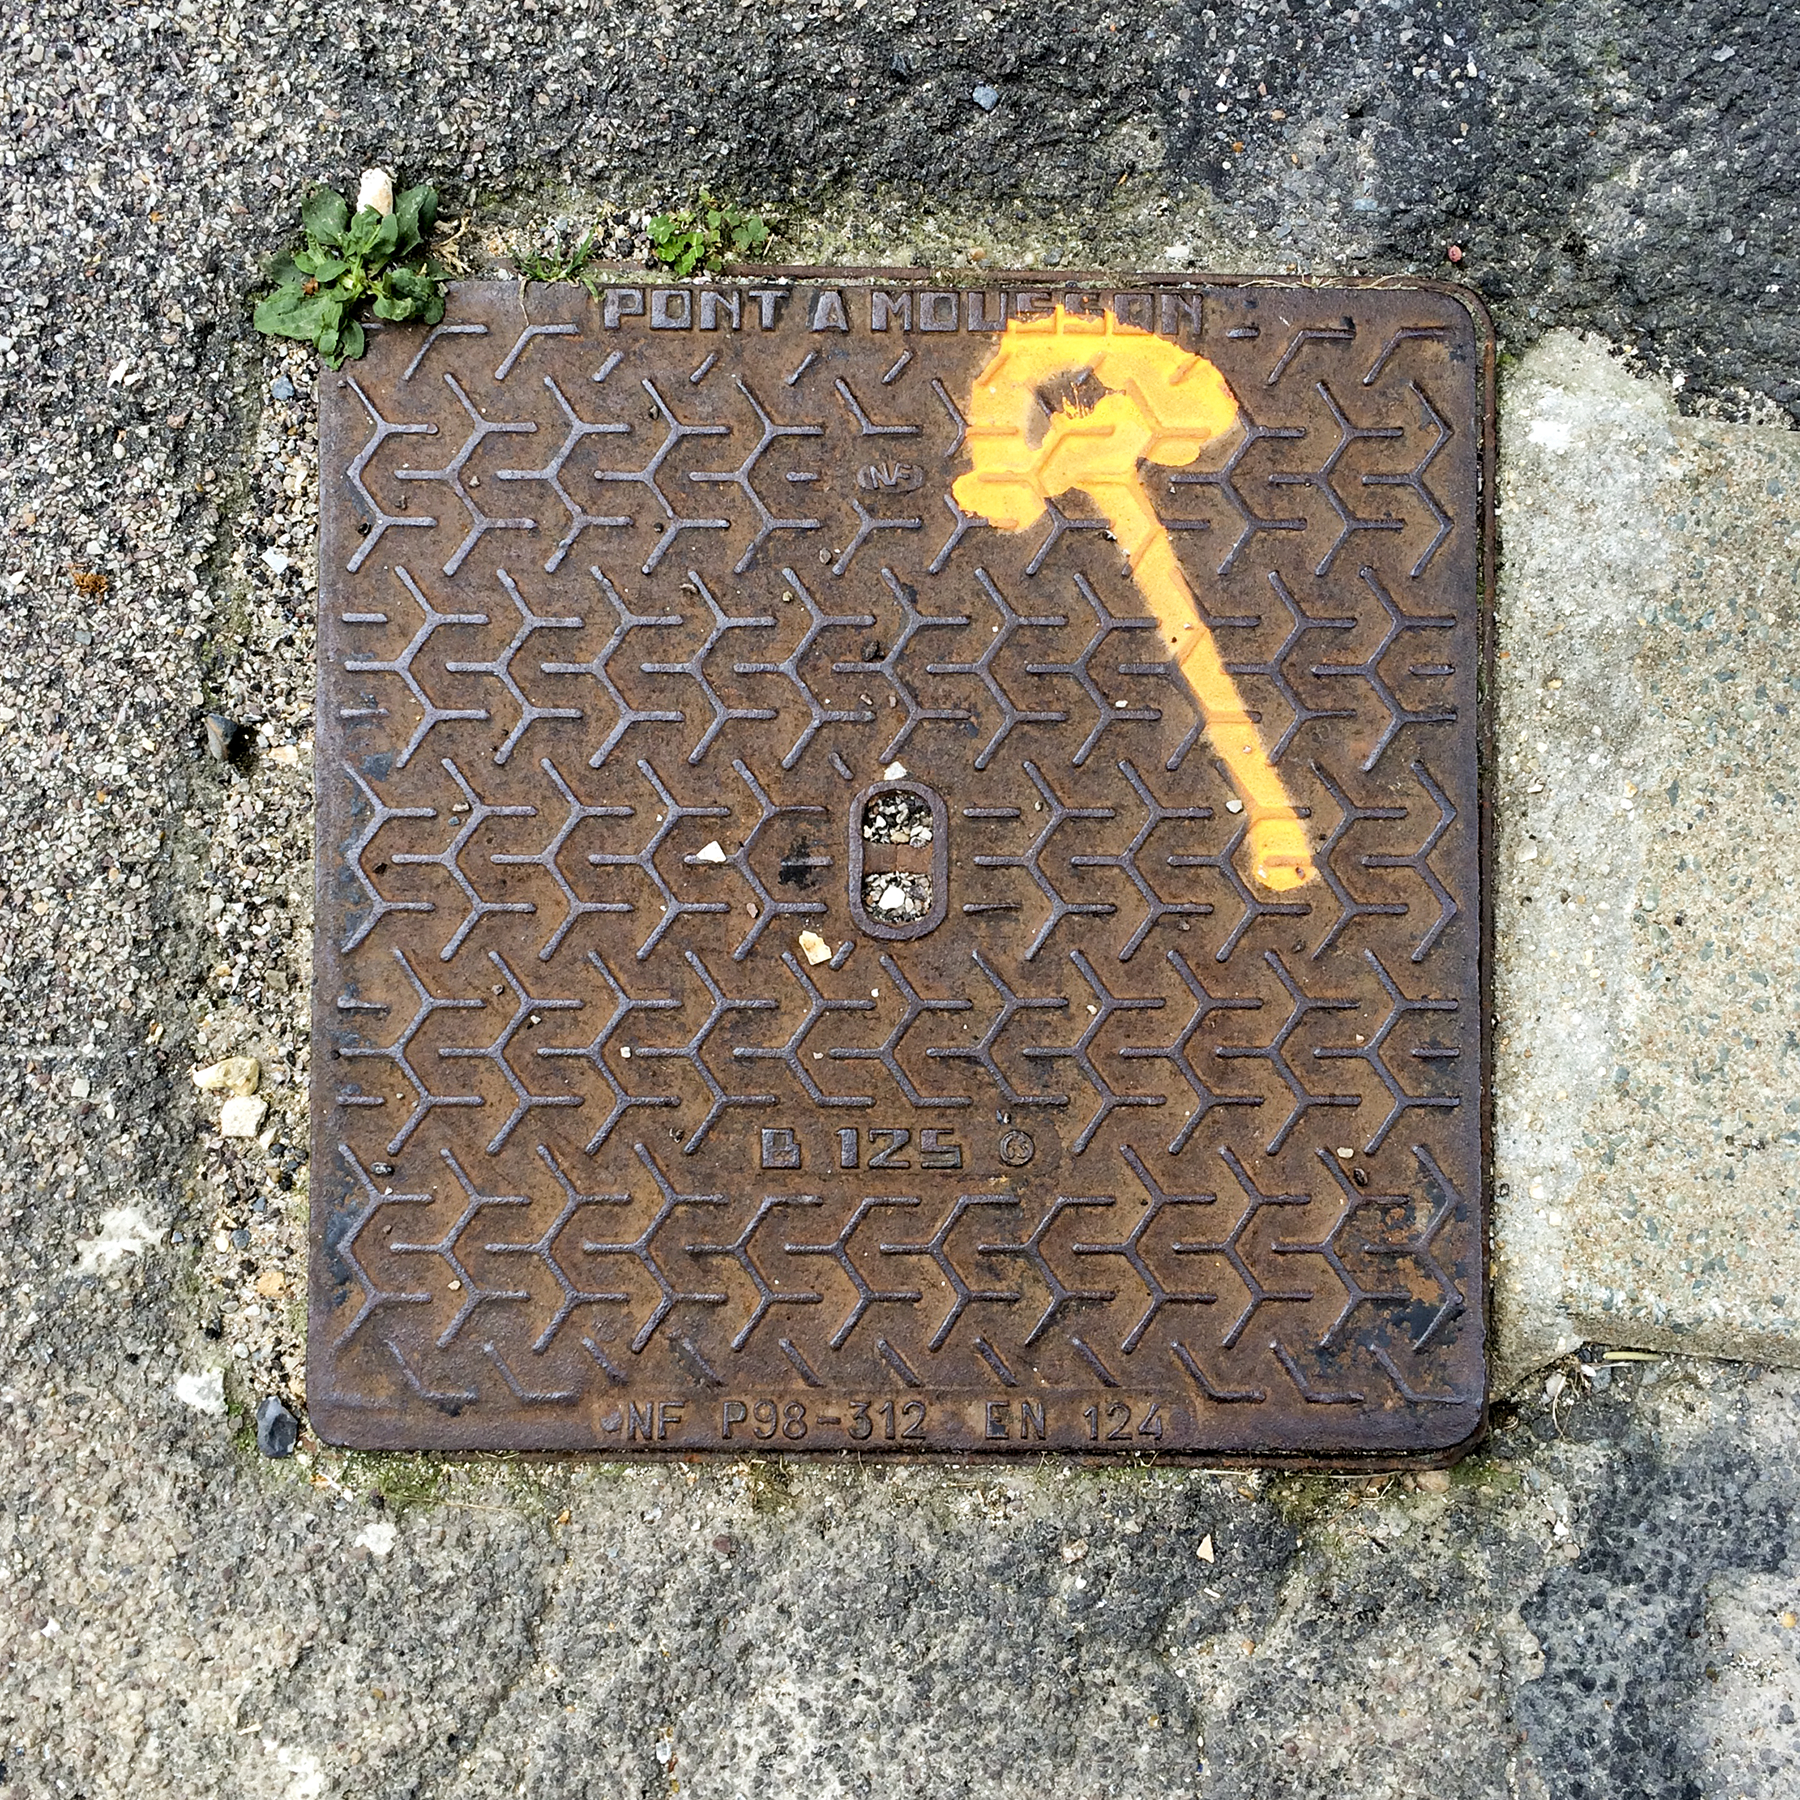 6th of 6 placeholder images: yellow arrow spraypainted on pavement